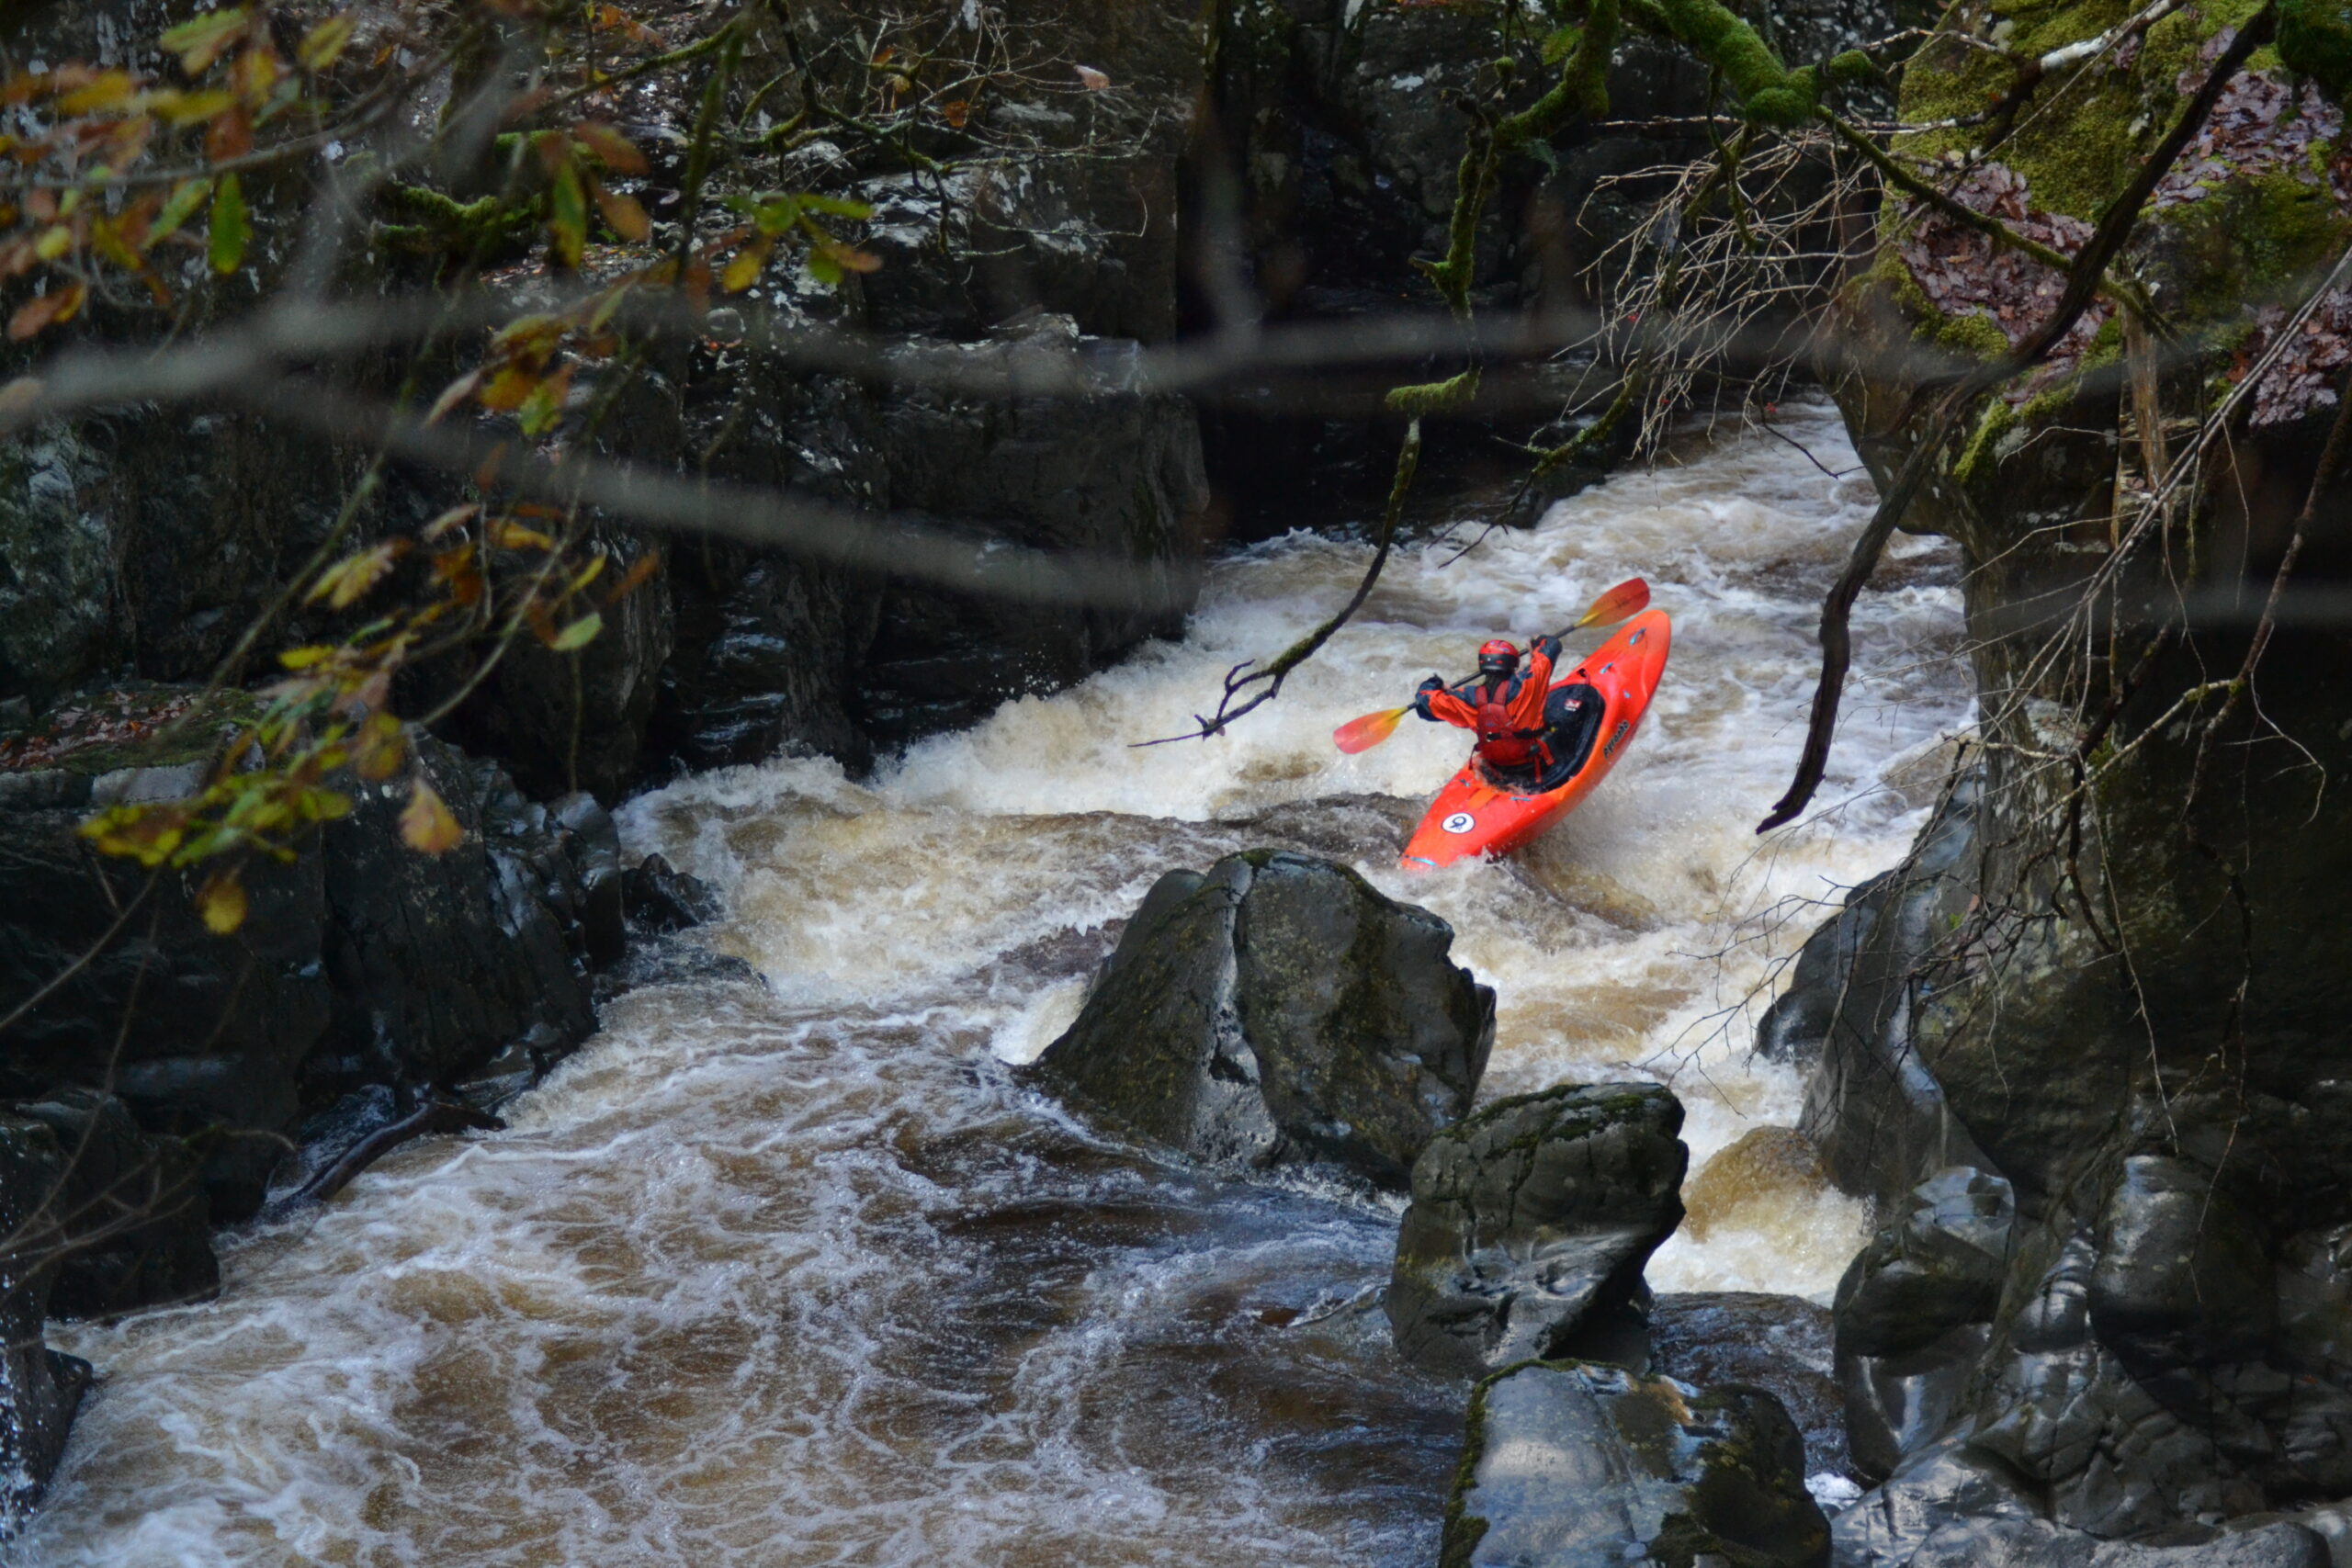 Dropping into the second gorge on Fairy Glen